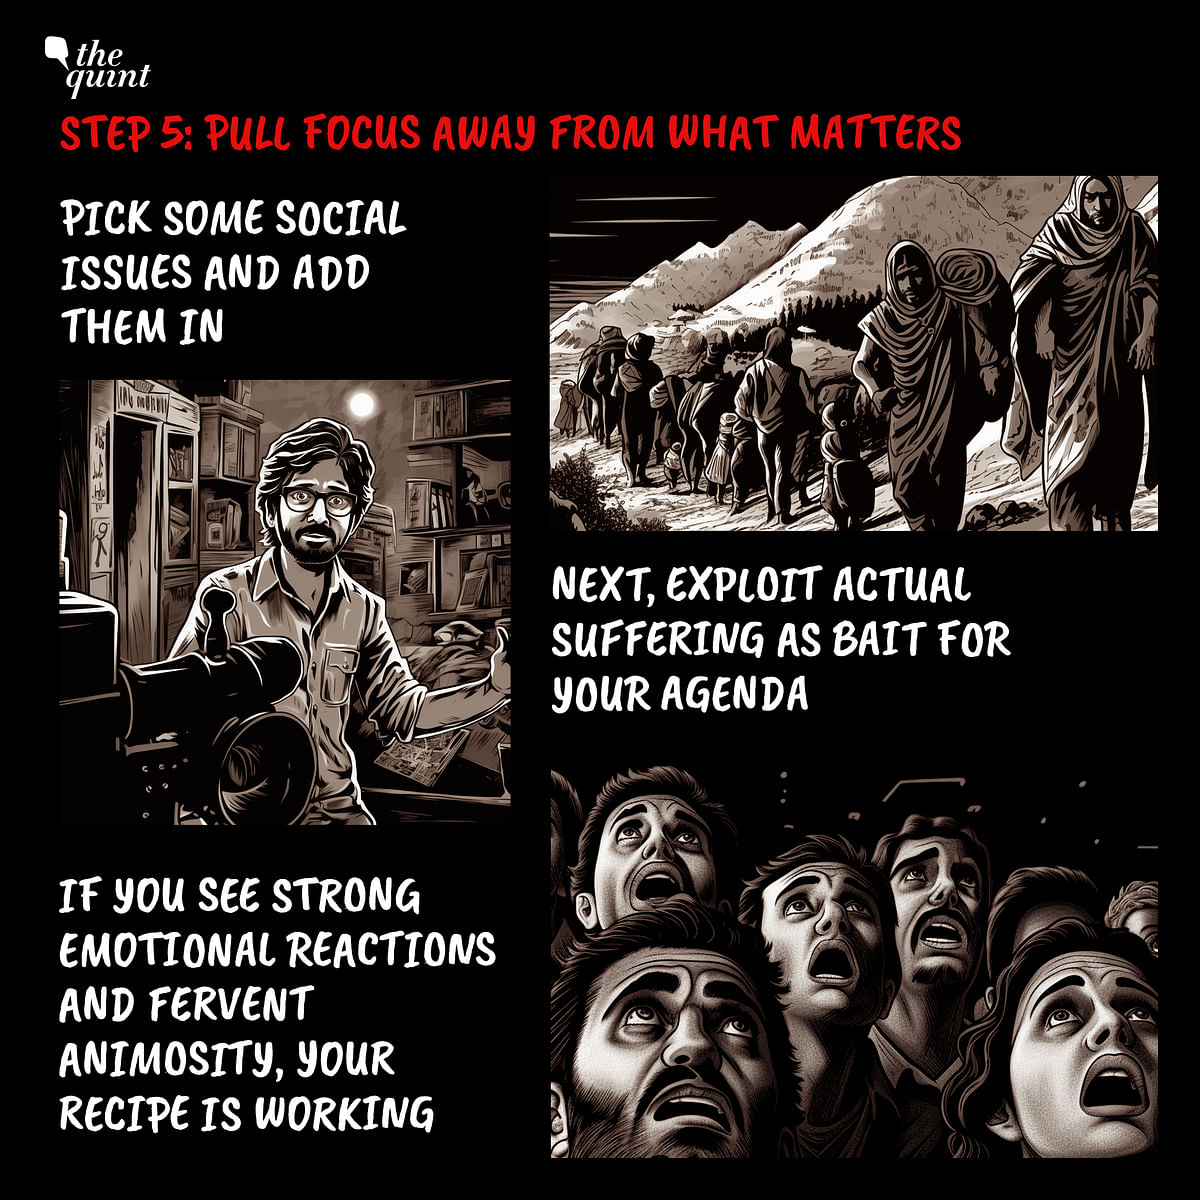 A graphic novel visualised with the help of Midjourney explores the ingredients of a propaganda film in India.